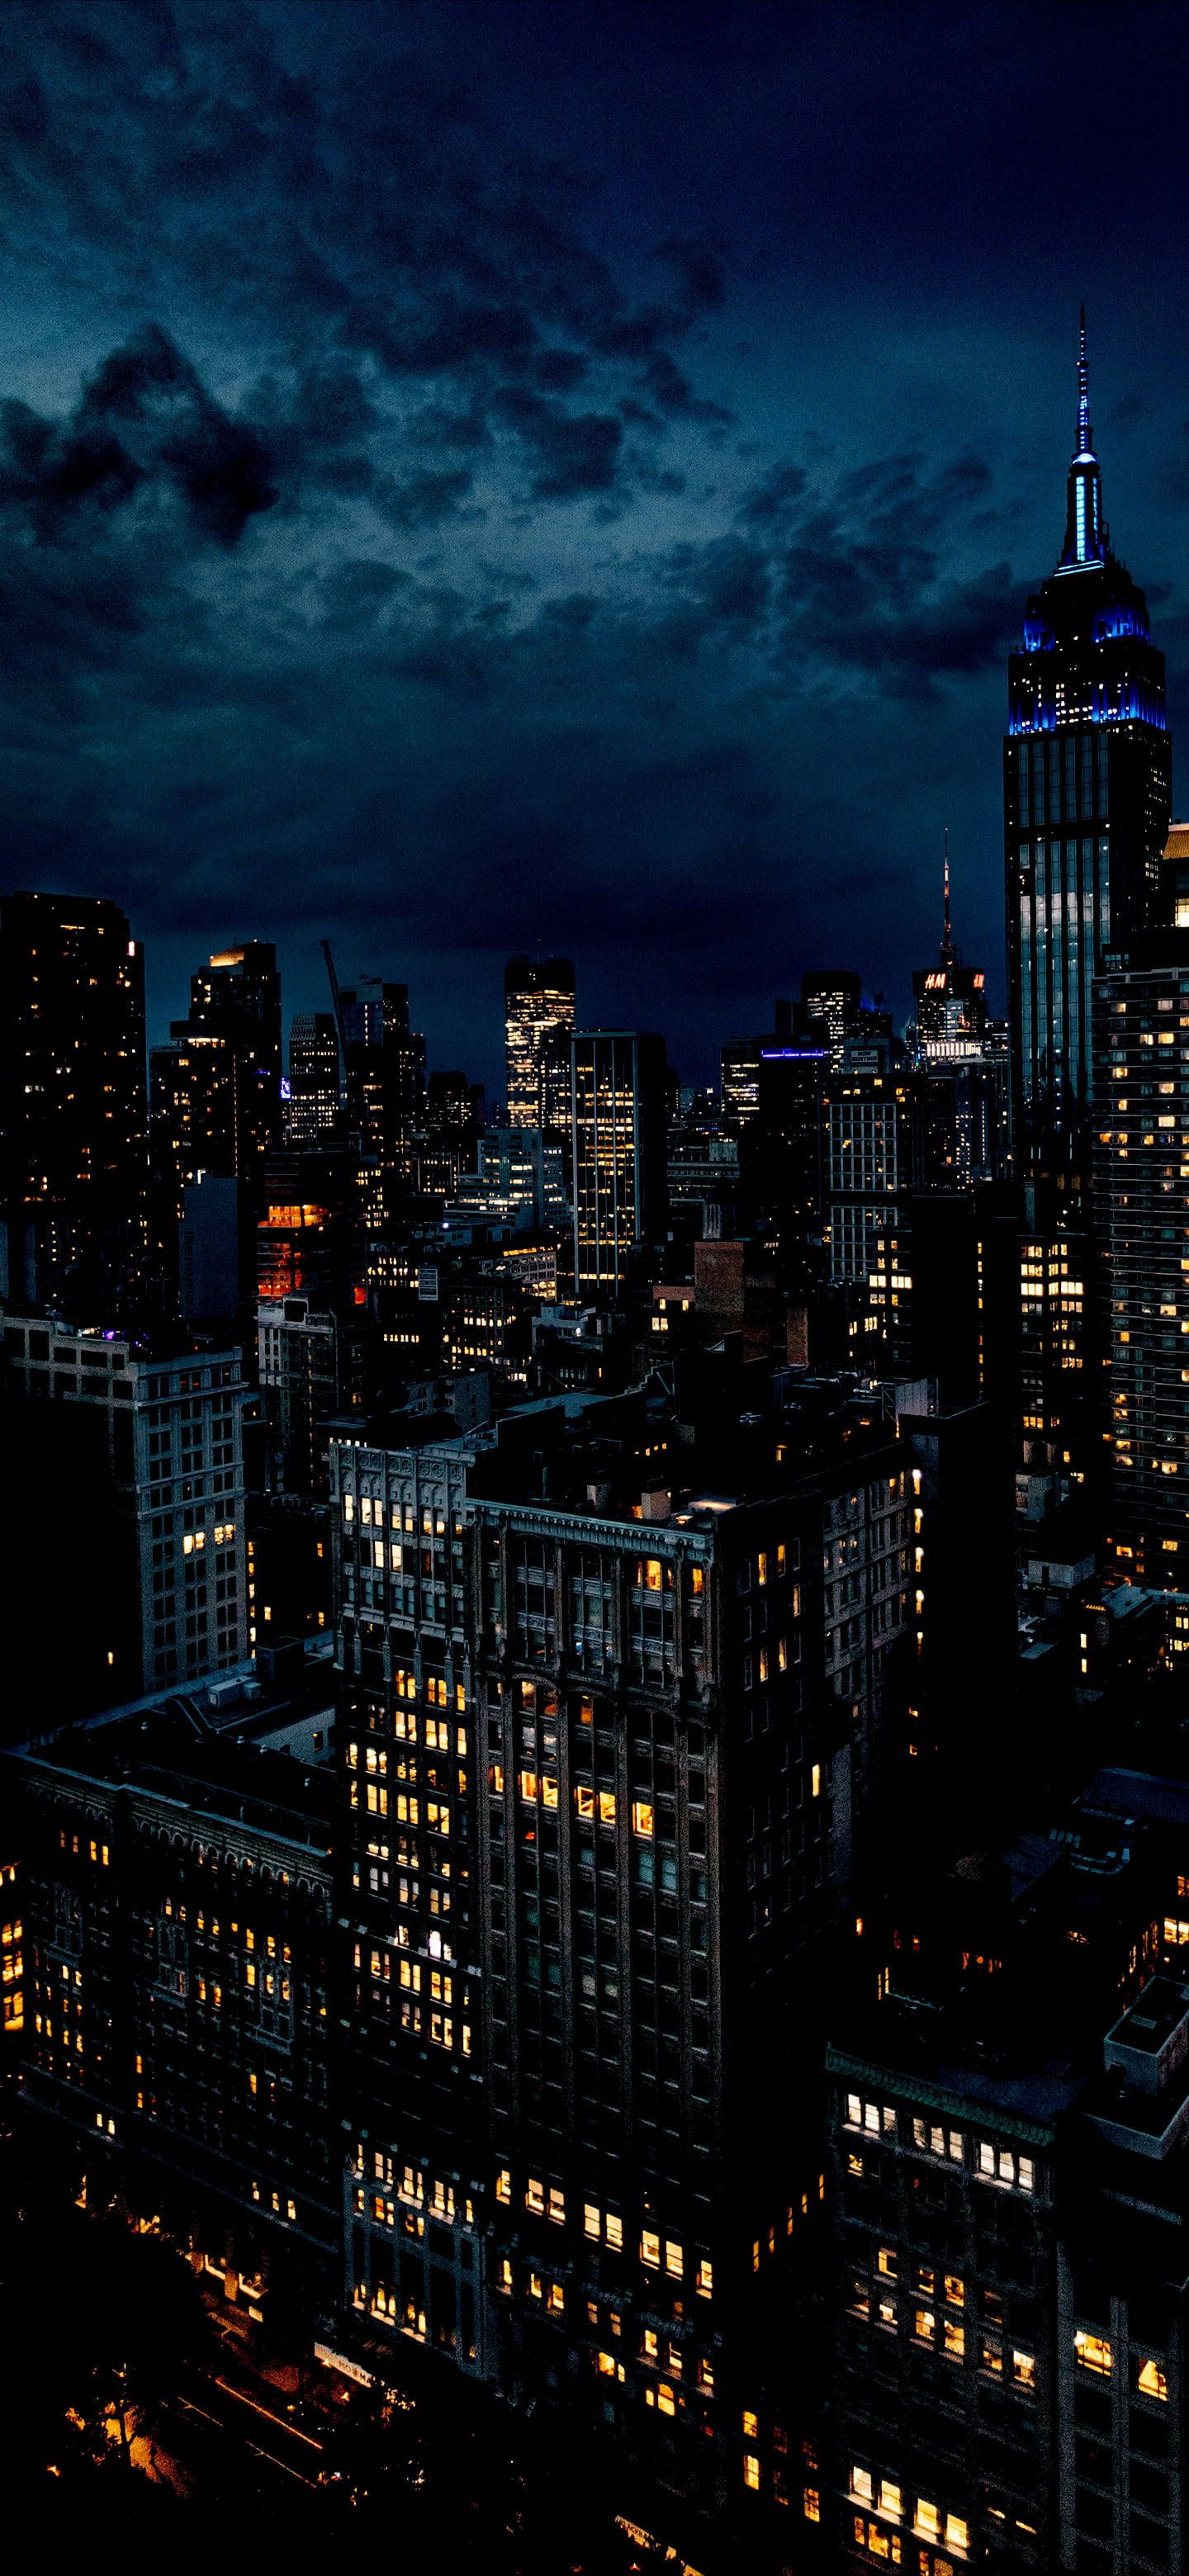 IPhone wallpaper of a cityscape at night with the Empire State Building lit up - Night, city